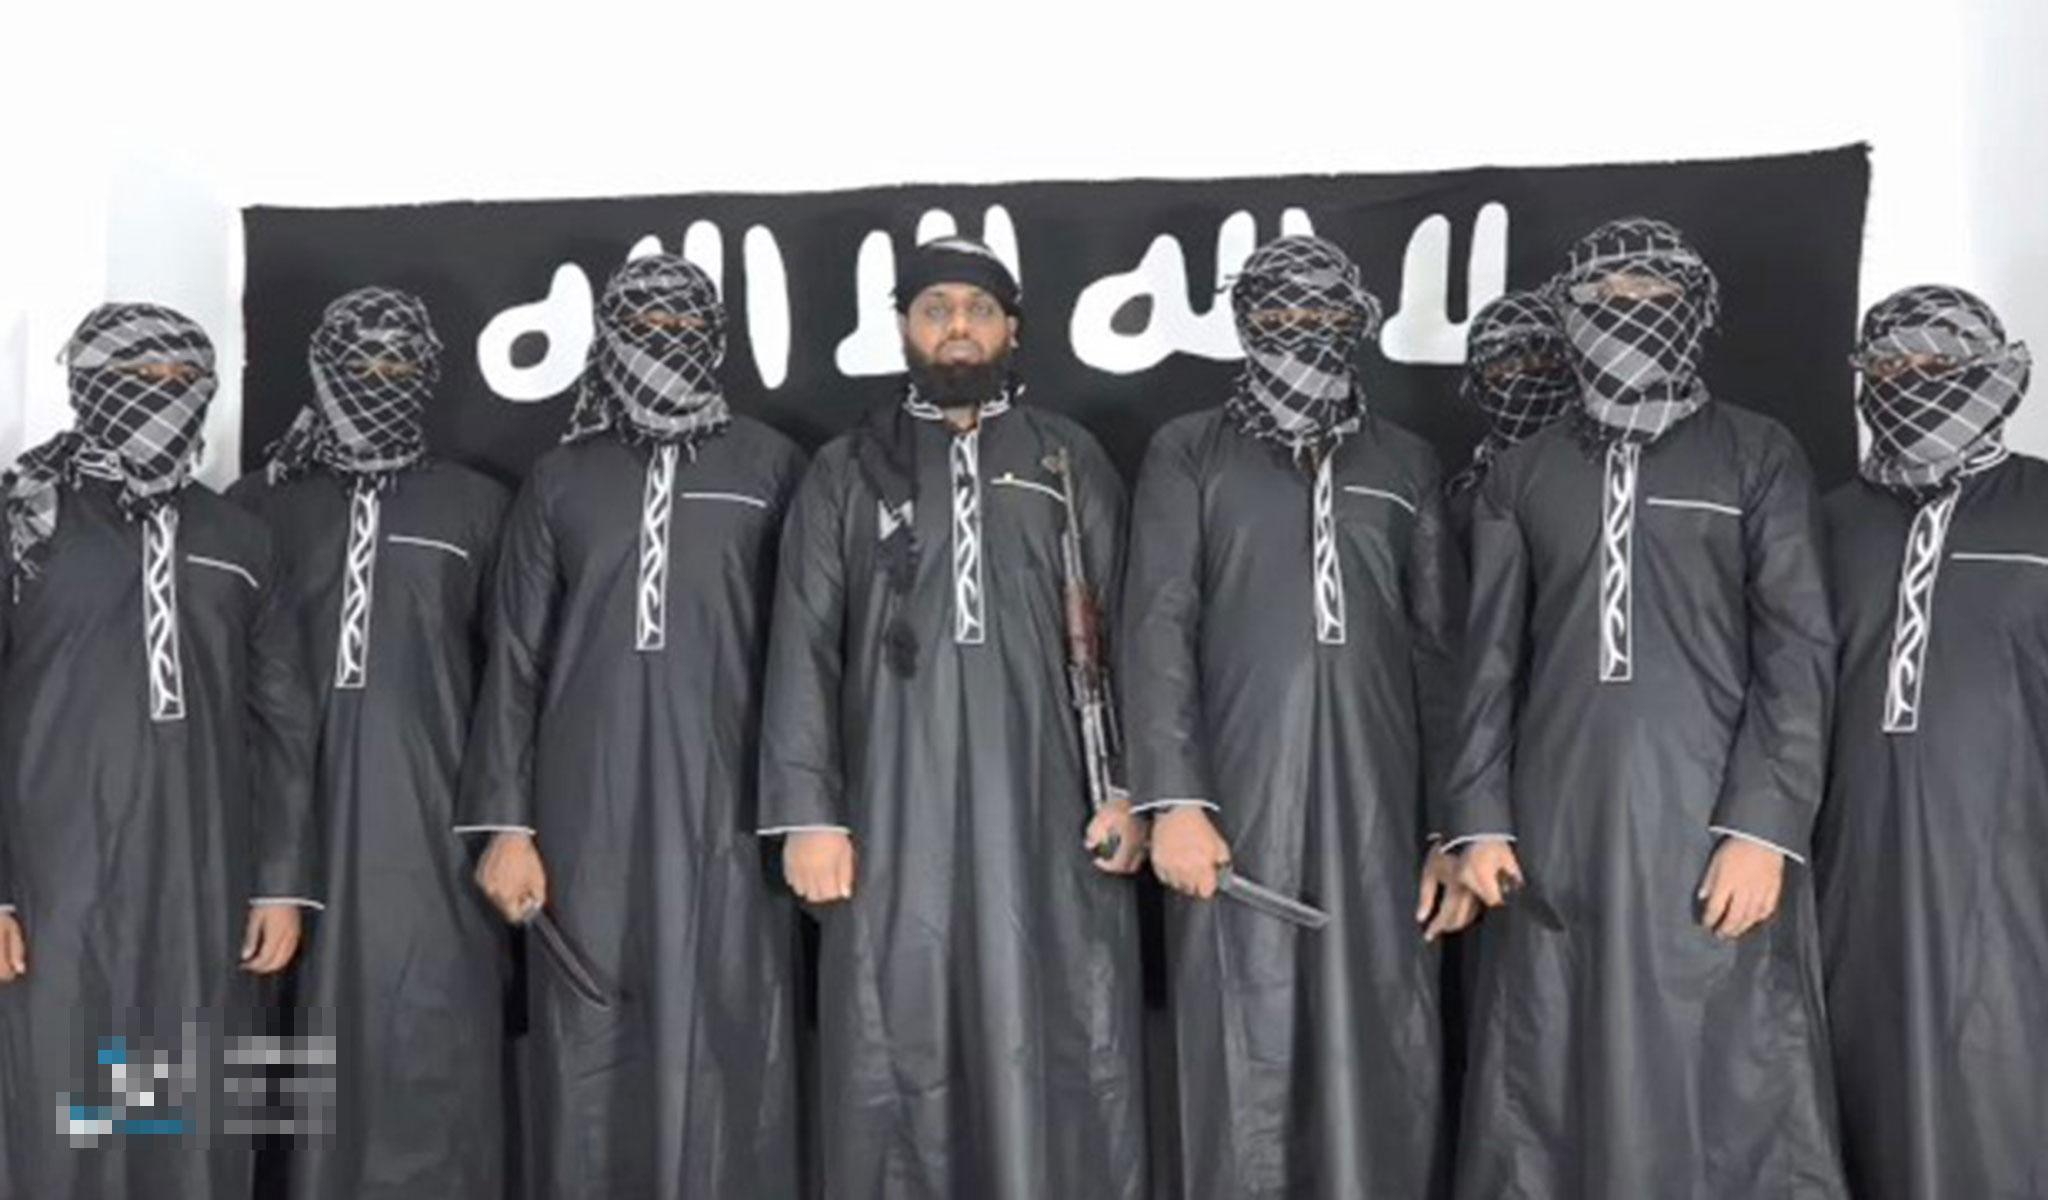 A photo released by Isis's Amaq propaganda agency claiming to show suicide bombers who carried out the Sri Lanka attacks